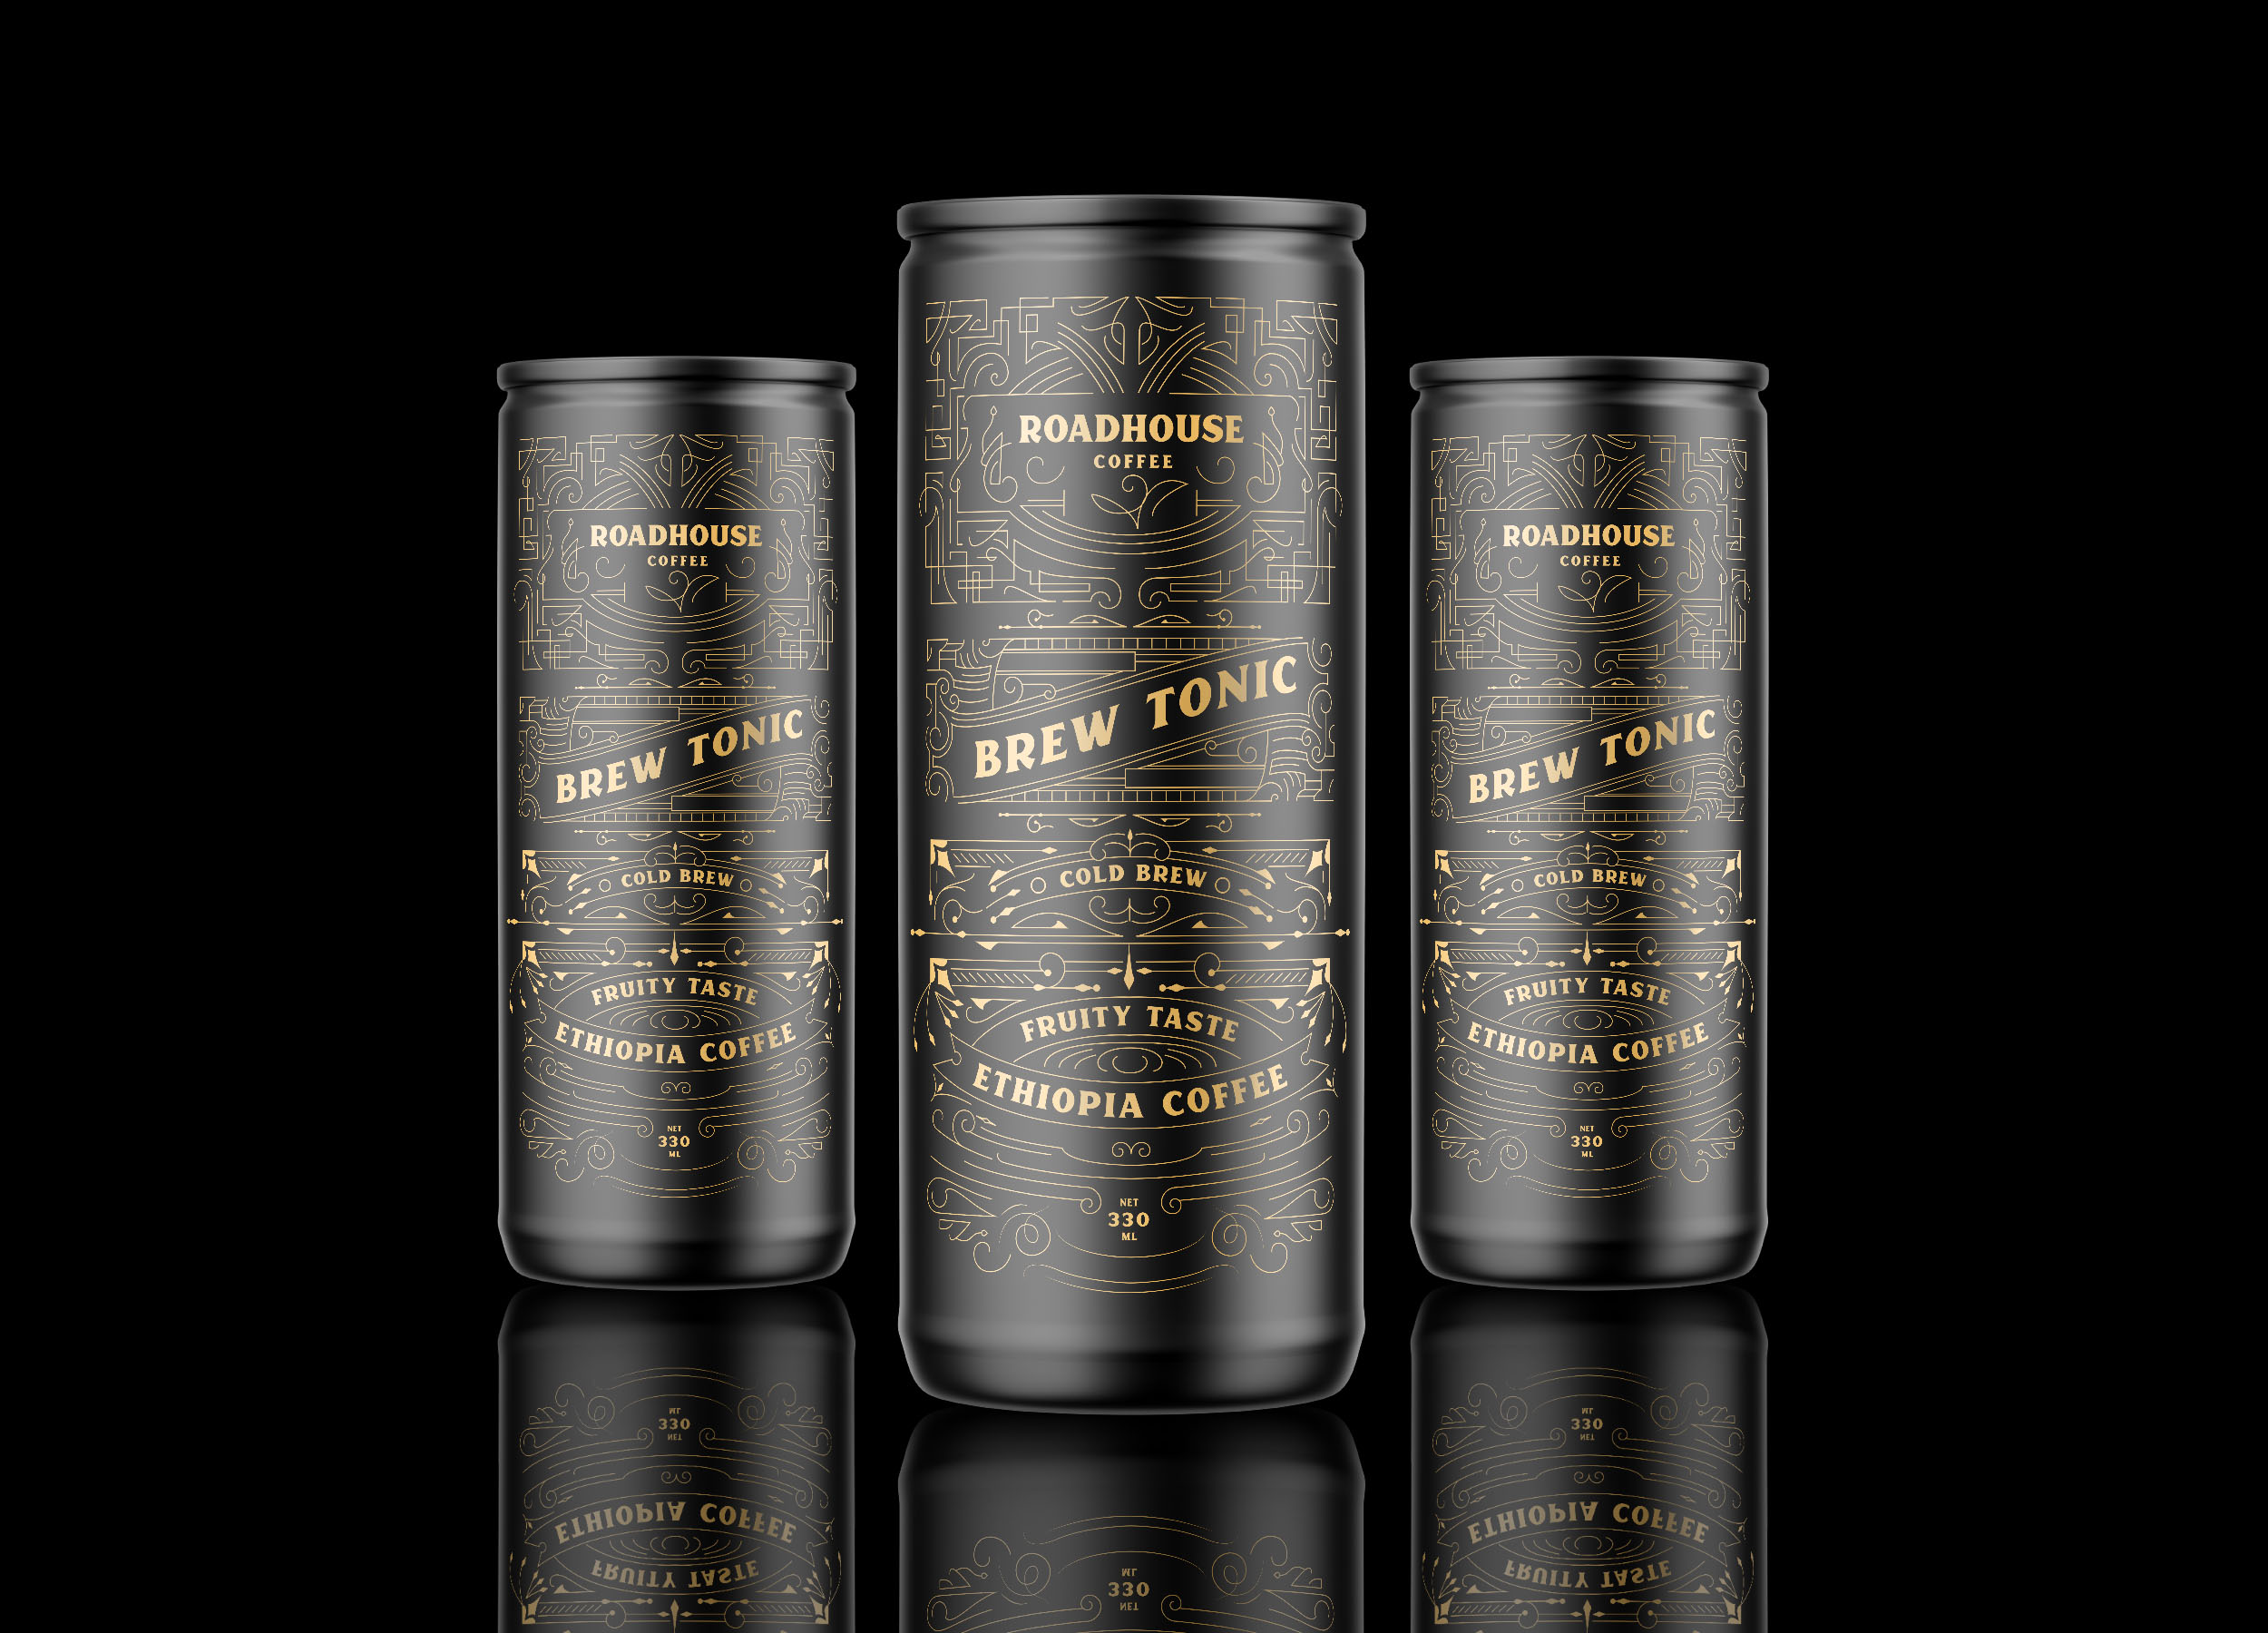 Widarto Impact Creating Can Bottle Design for Roadhouse Cold Brew Variants